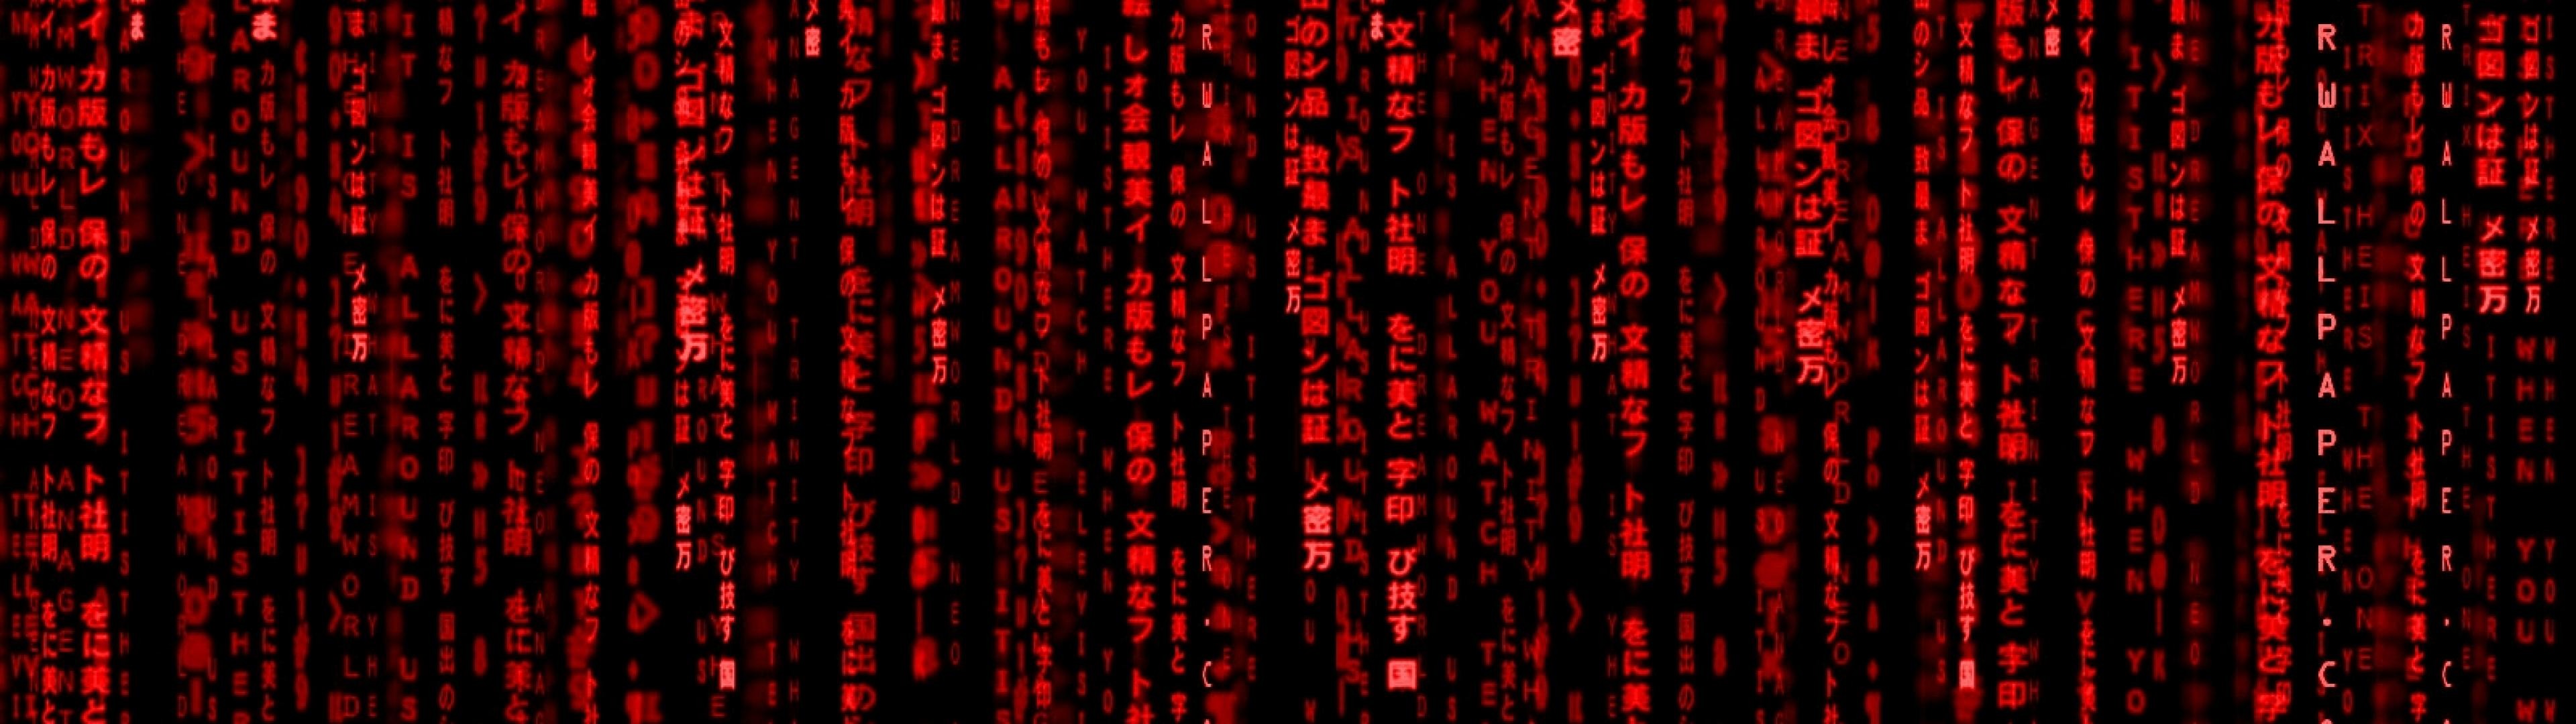 3840x1080 red matrix code Ultra or Dual High Definition 2560x1440  